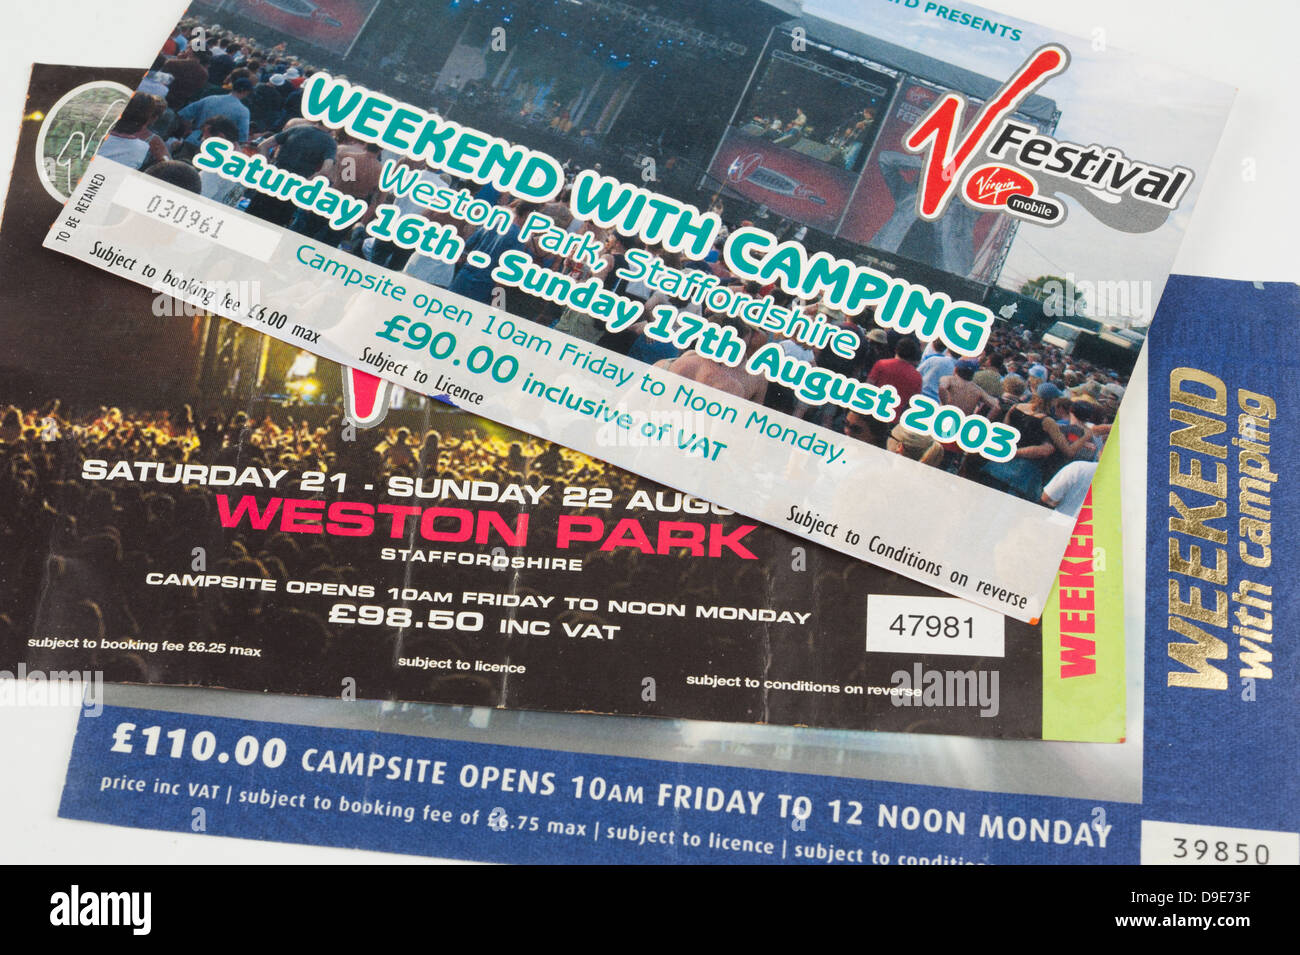 V Festival weekend camping tickets for Weston Park, Staffordshire, 2003-2005 Stock Photo